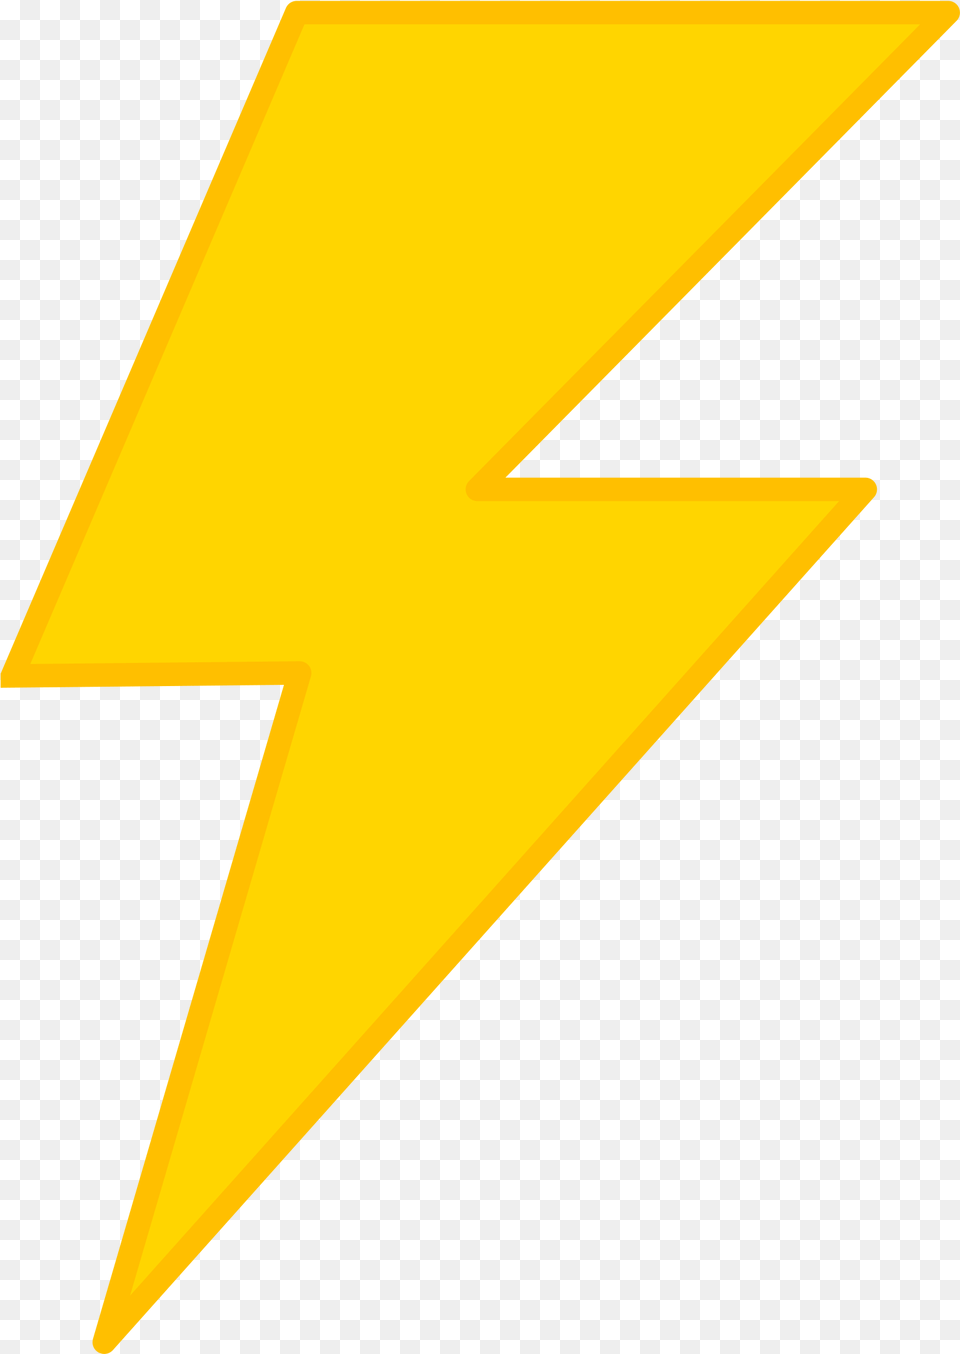 Library Of Electric Bolt Graphic Free Files Transparent Background Lightning Bolt Clipart, Symbol, Star Symbol Png Image